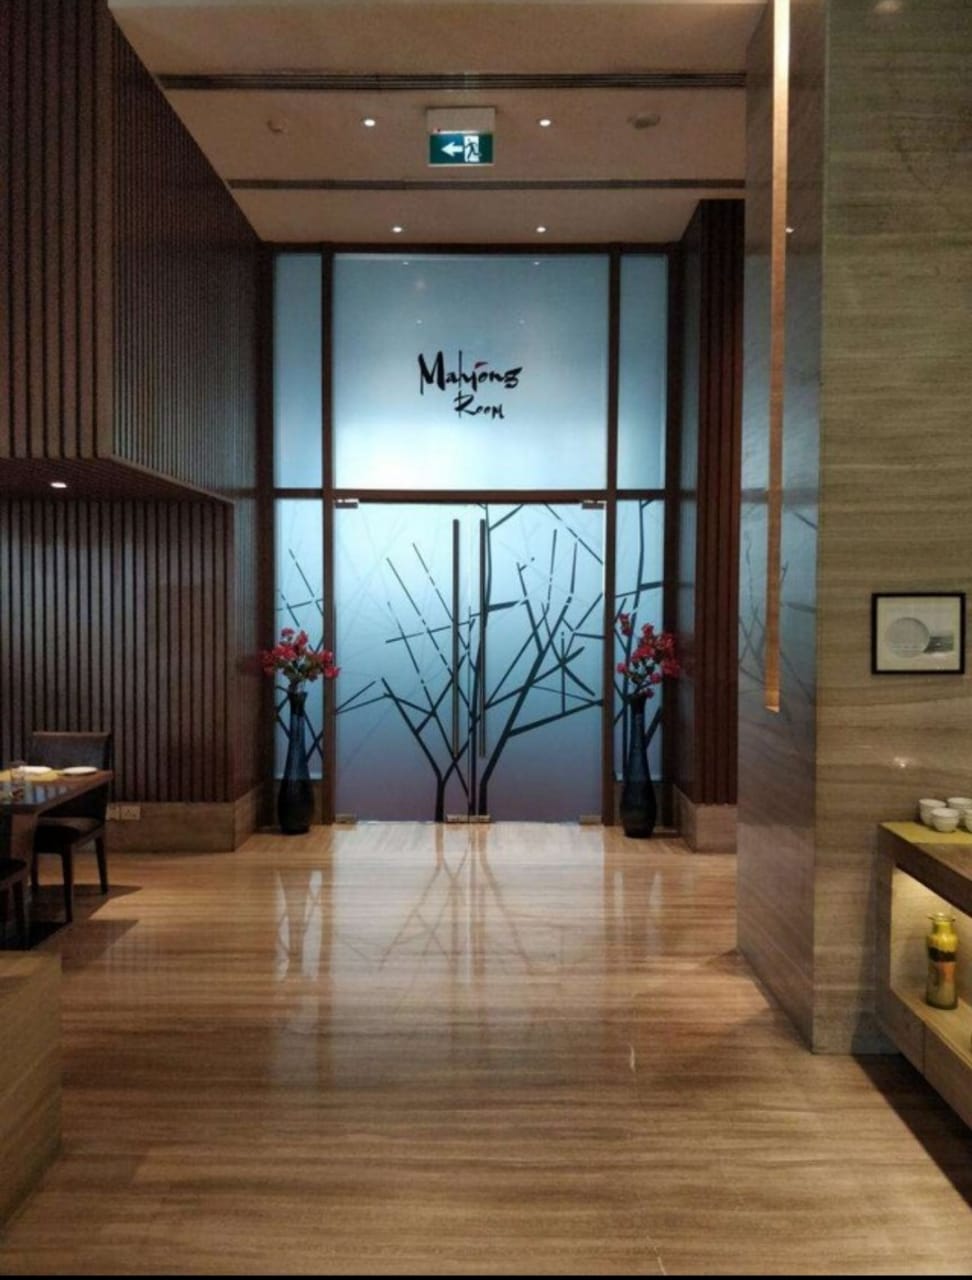 Mahjong Itc S New Chinese Restaurant Is Affordable And The Food Is Familiar Explocity Guide To Bangalore People Culture Cuisine Shopping News